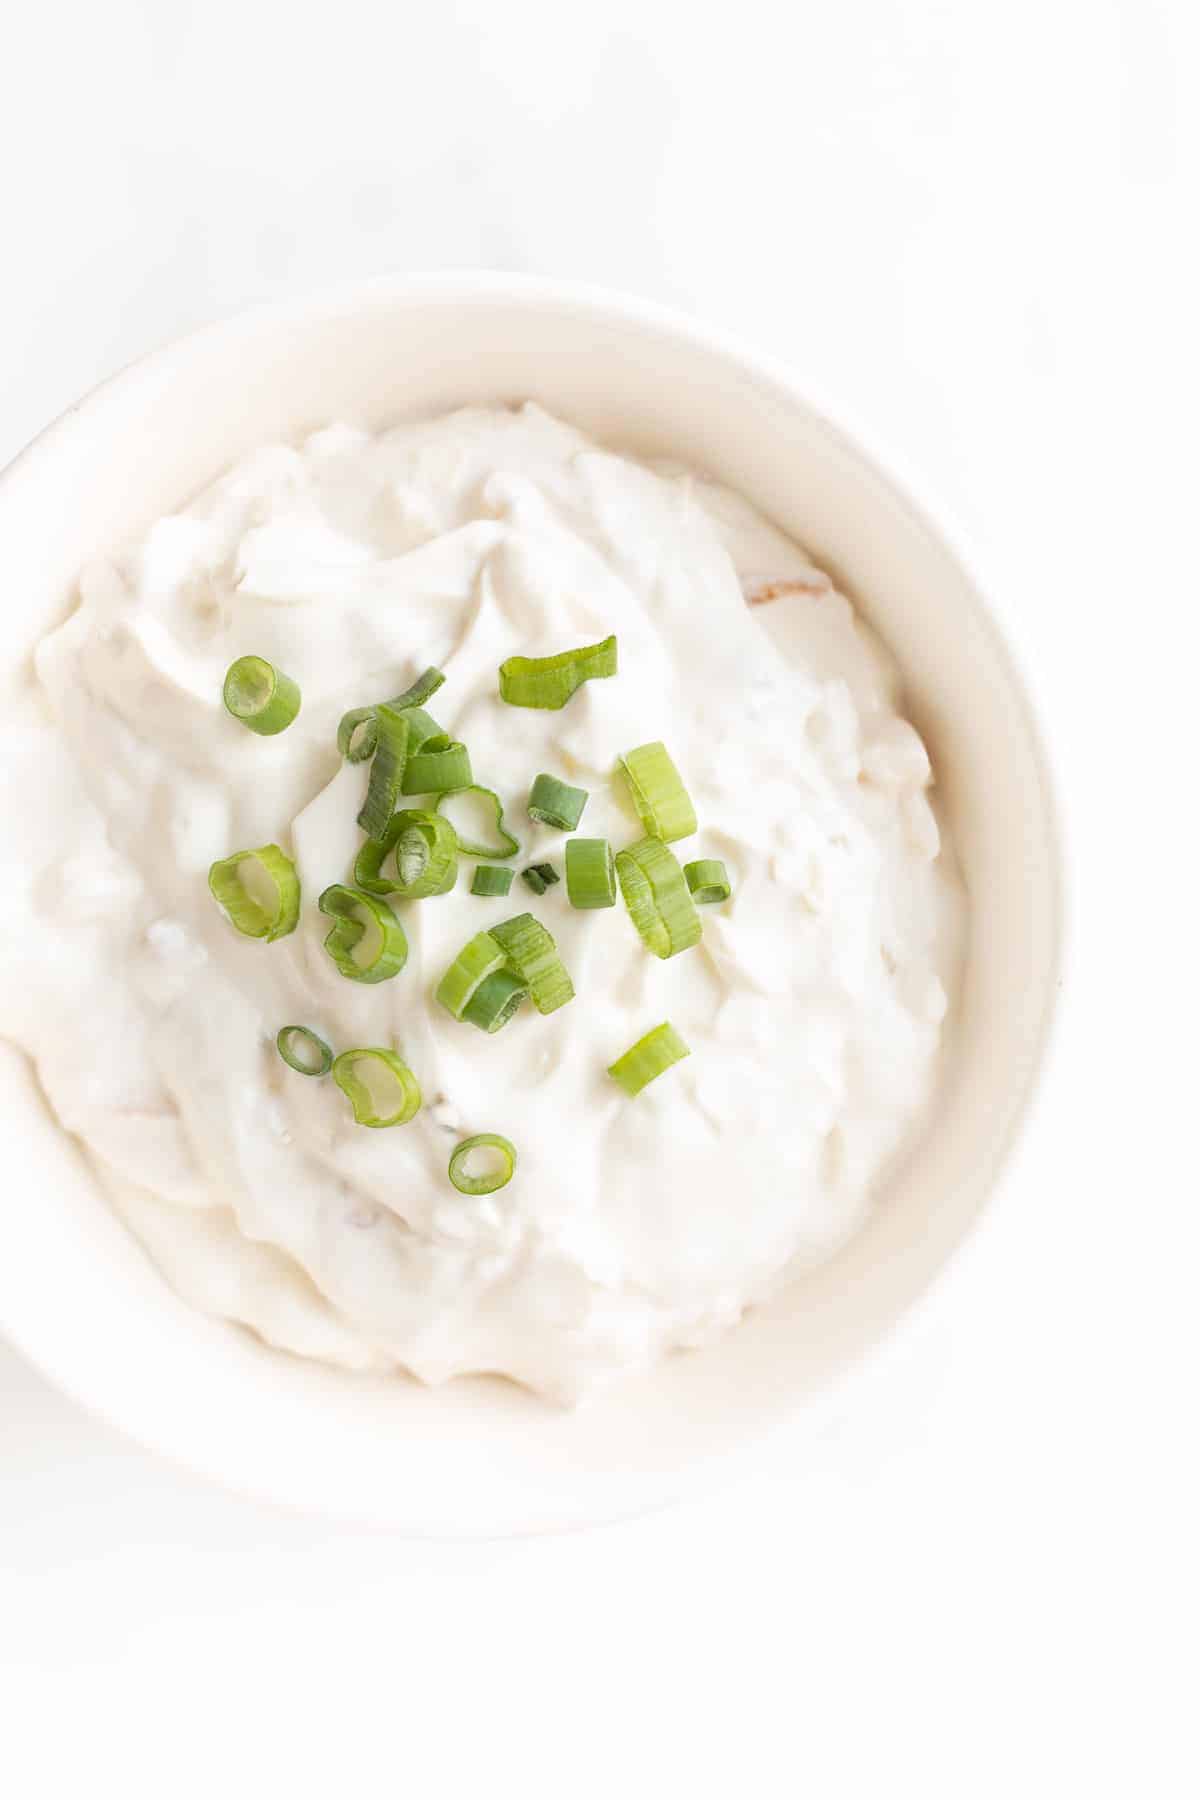 sour cream and onion dip in a bowl